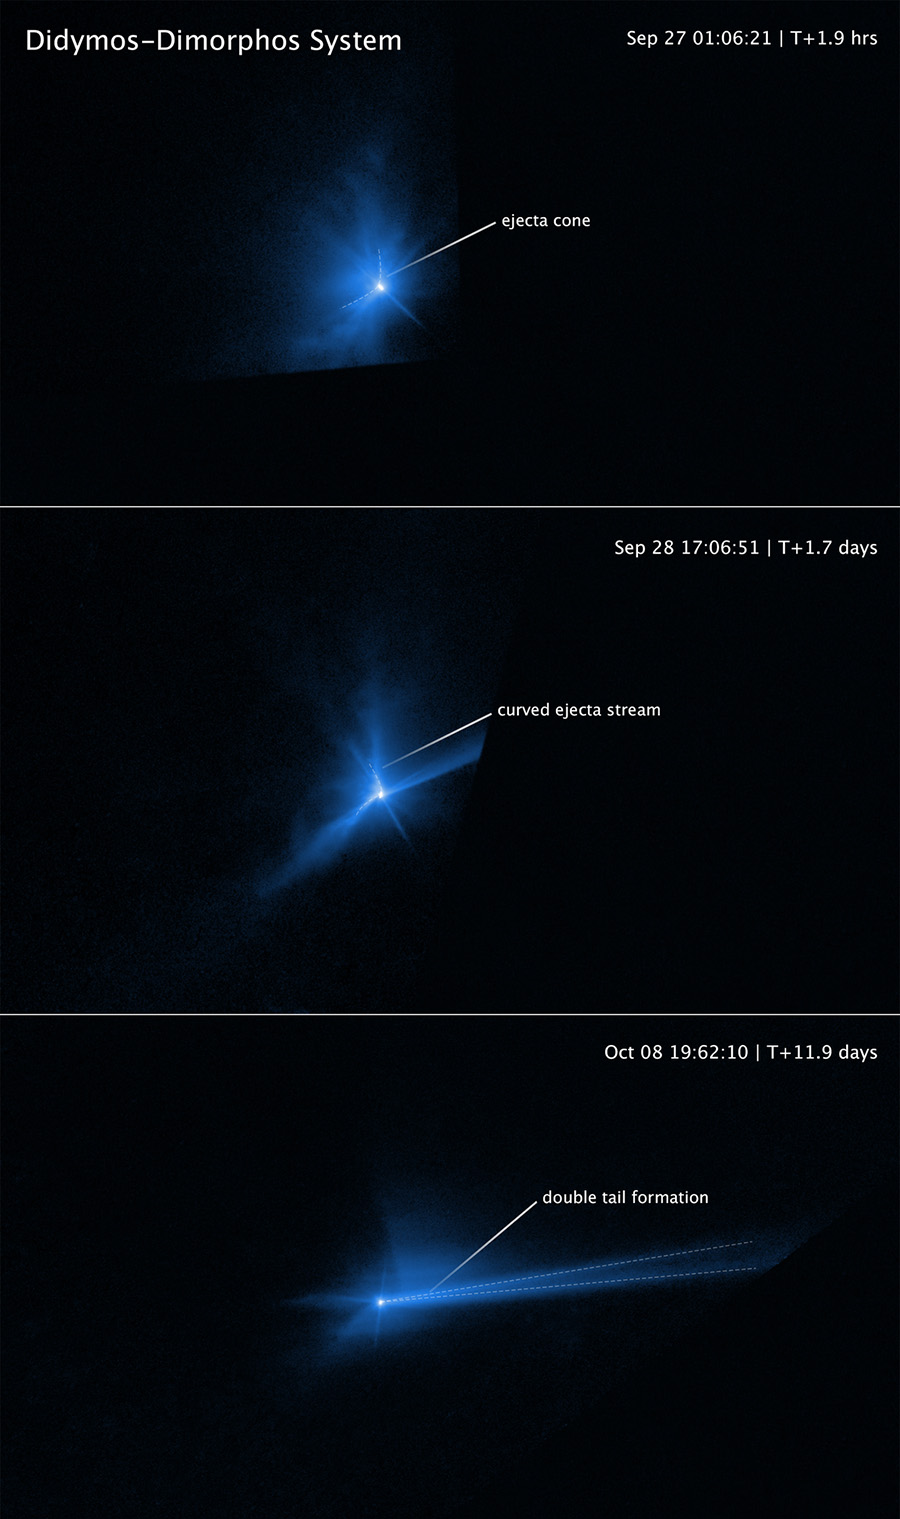 Hubble images of blue tails of debris ejected from asteroid